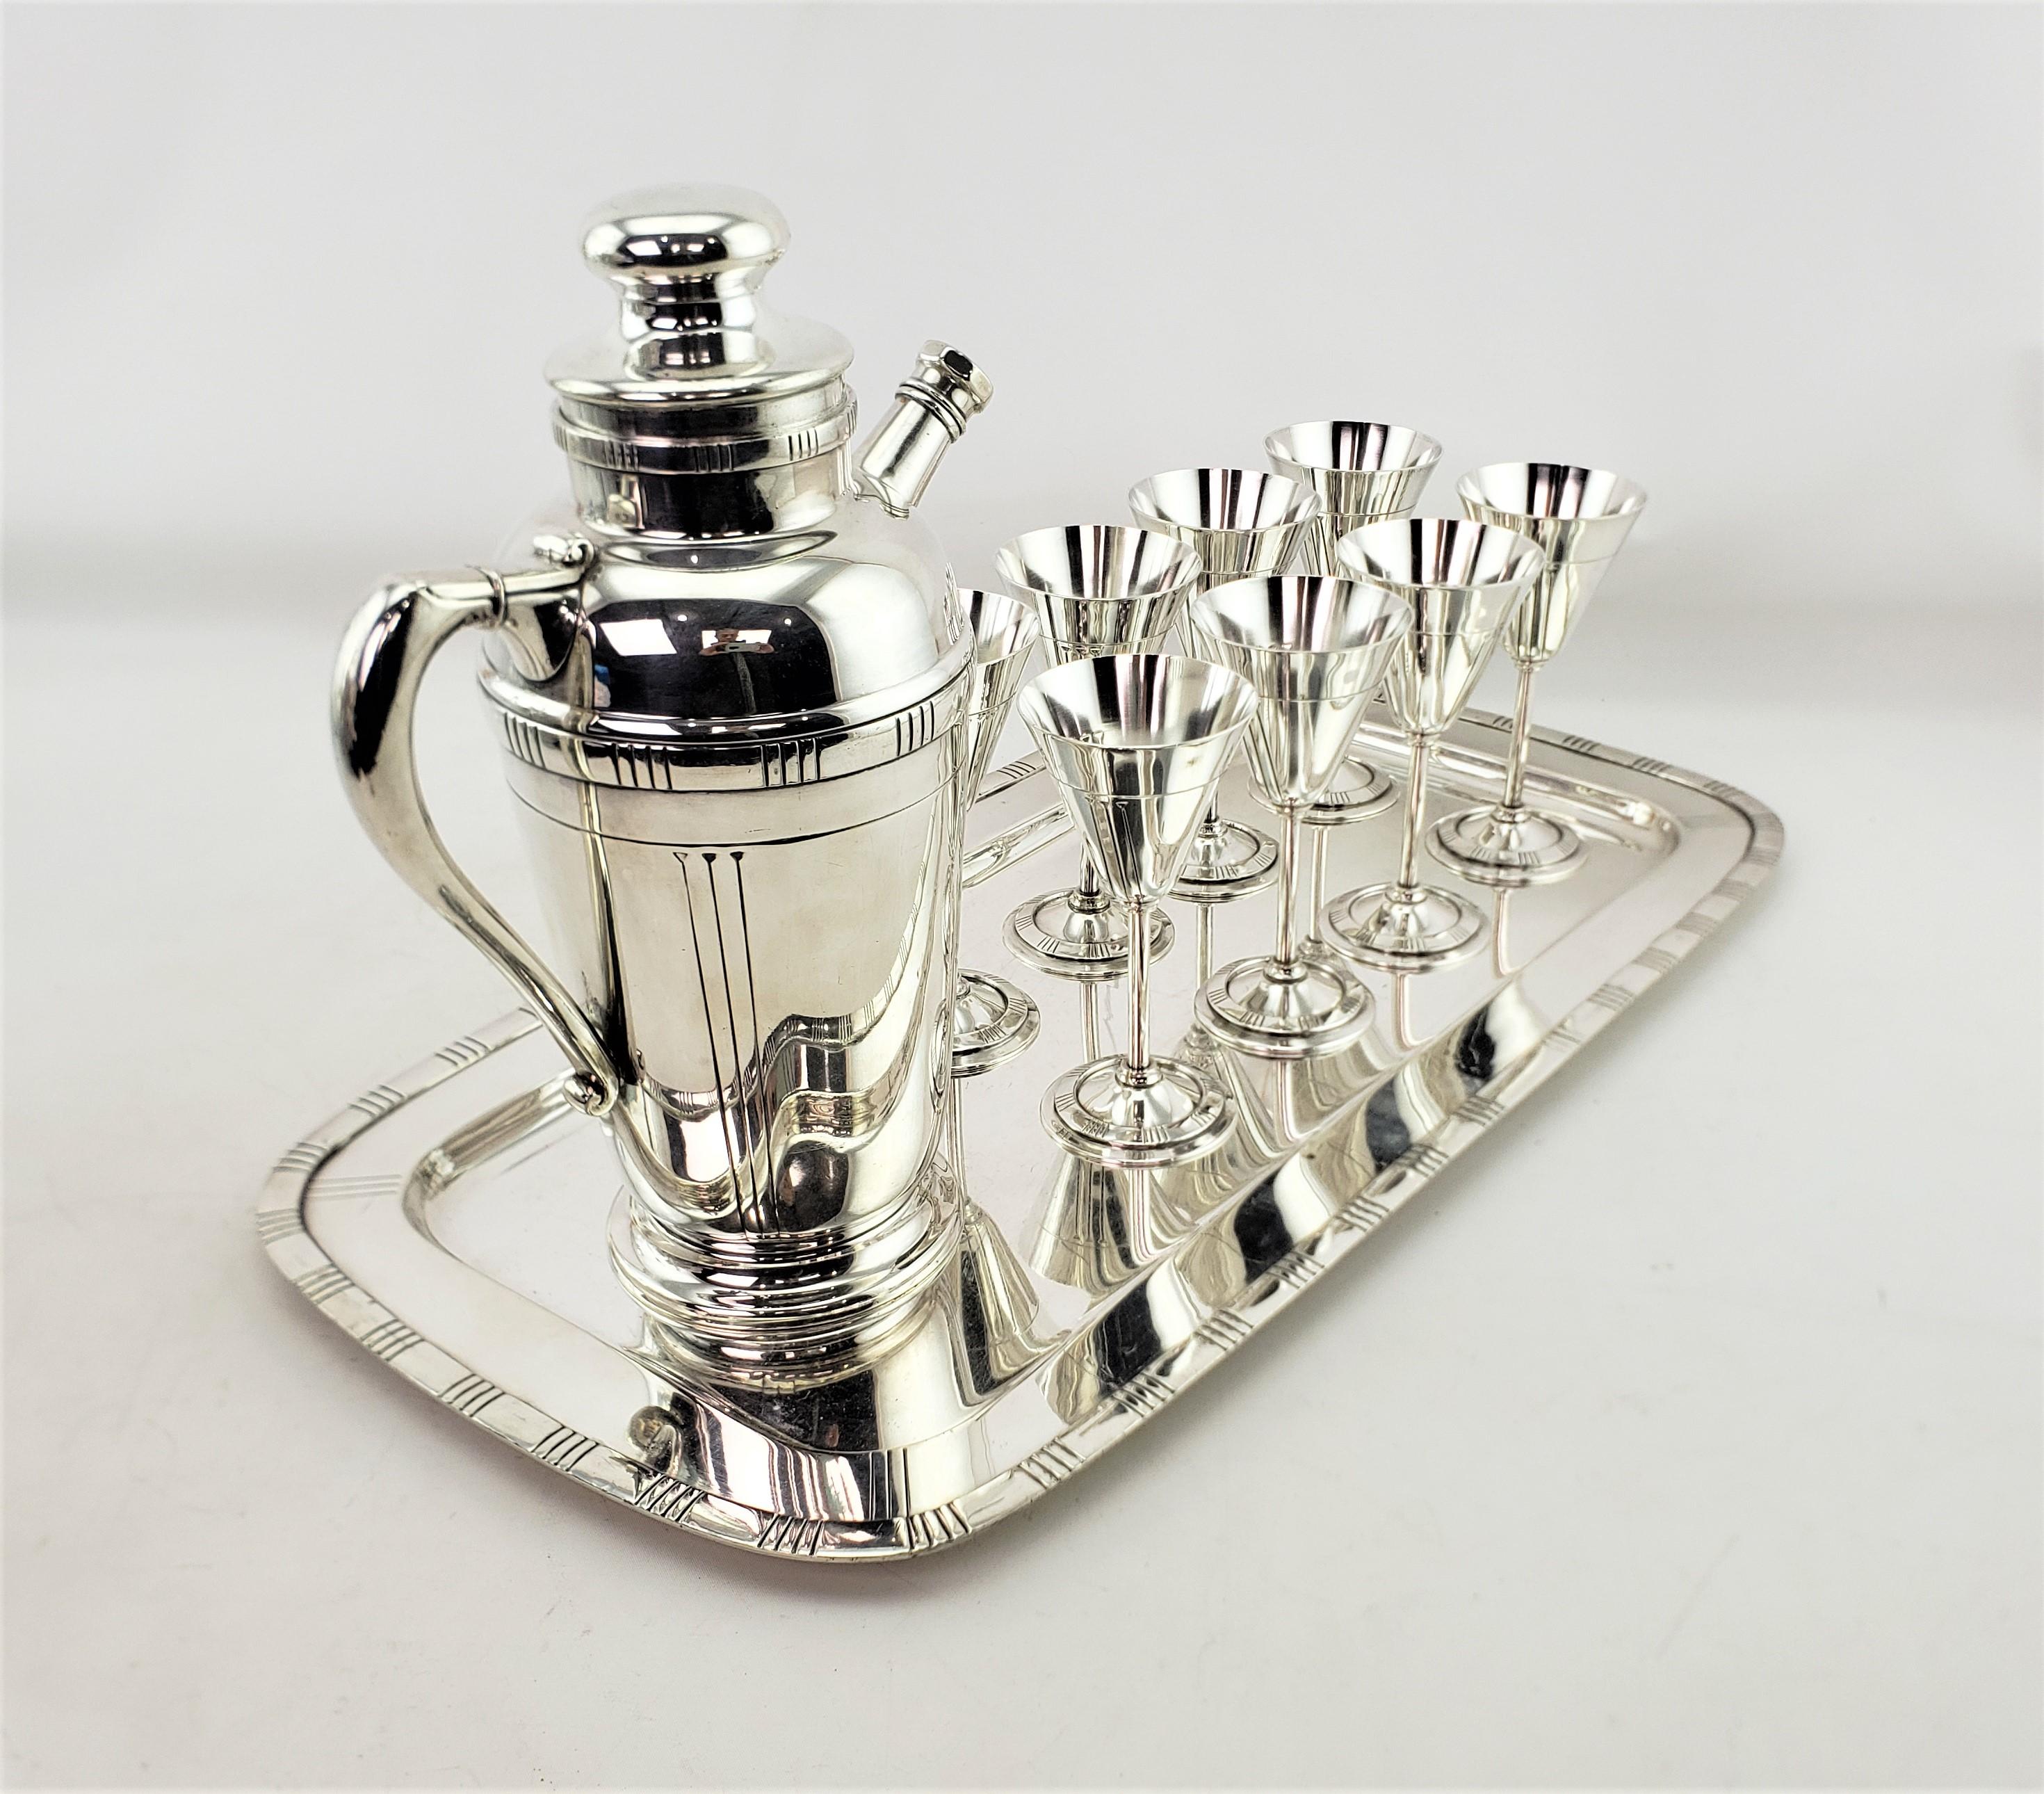 Midcentury Silver Plated Cocktail Set with Tray, Glasses & Shaker Pitcher In Good Condition For Sale In Hamilton, Ontario